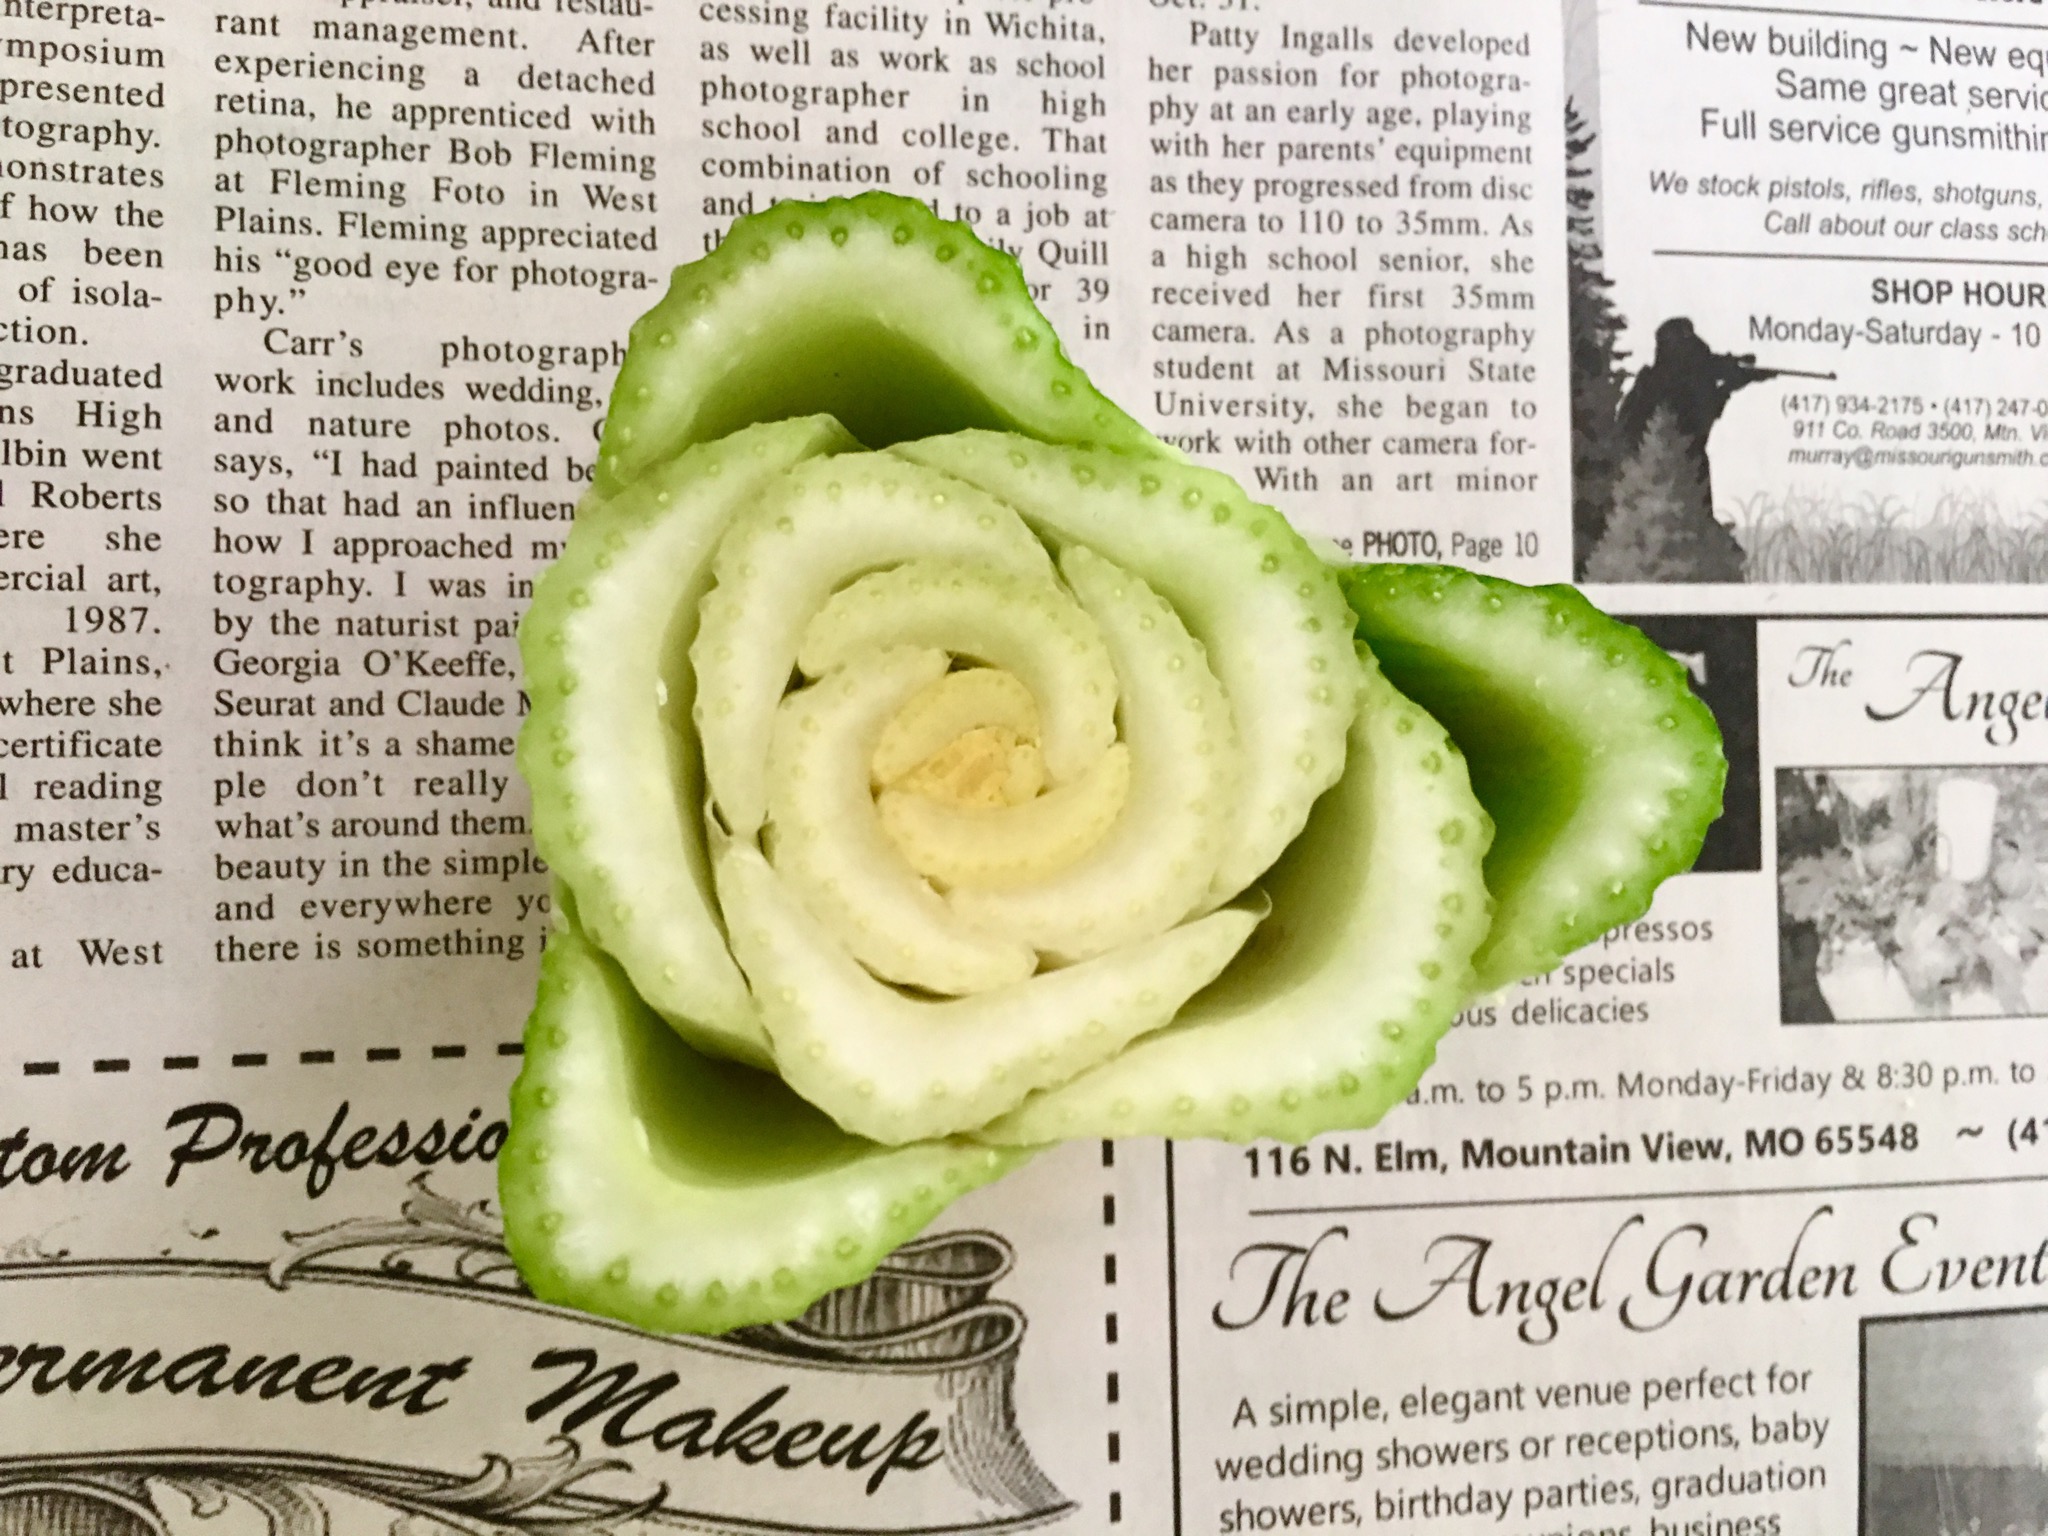 green thursday: make a flower stamp from a celery stalk! — steemit